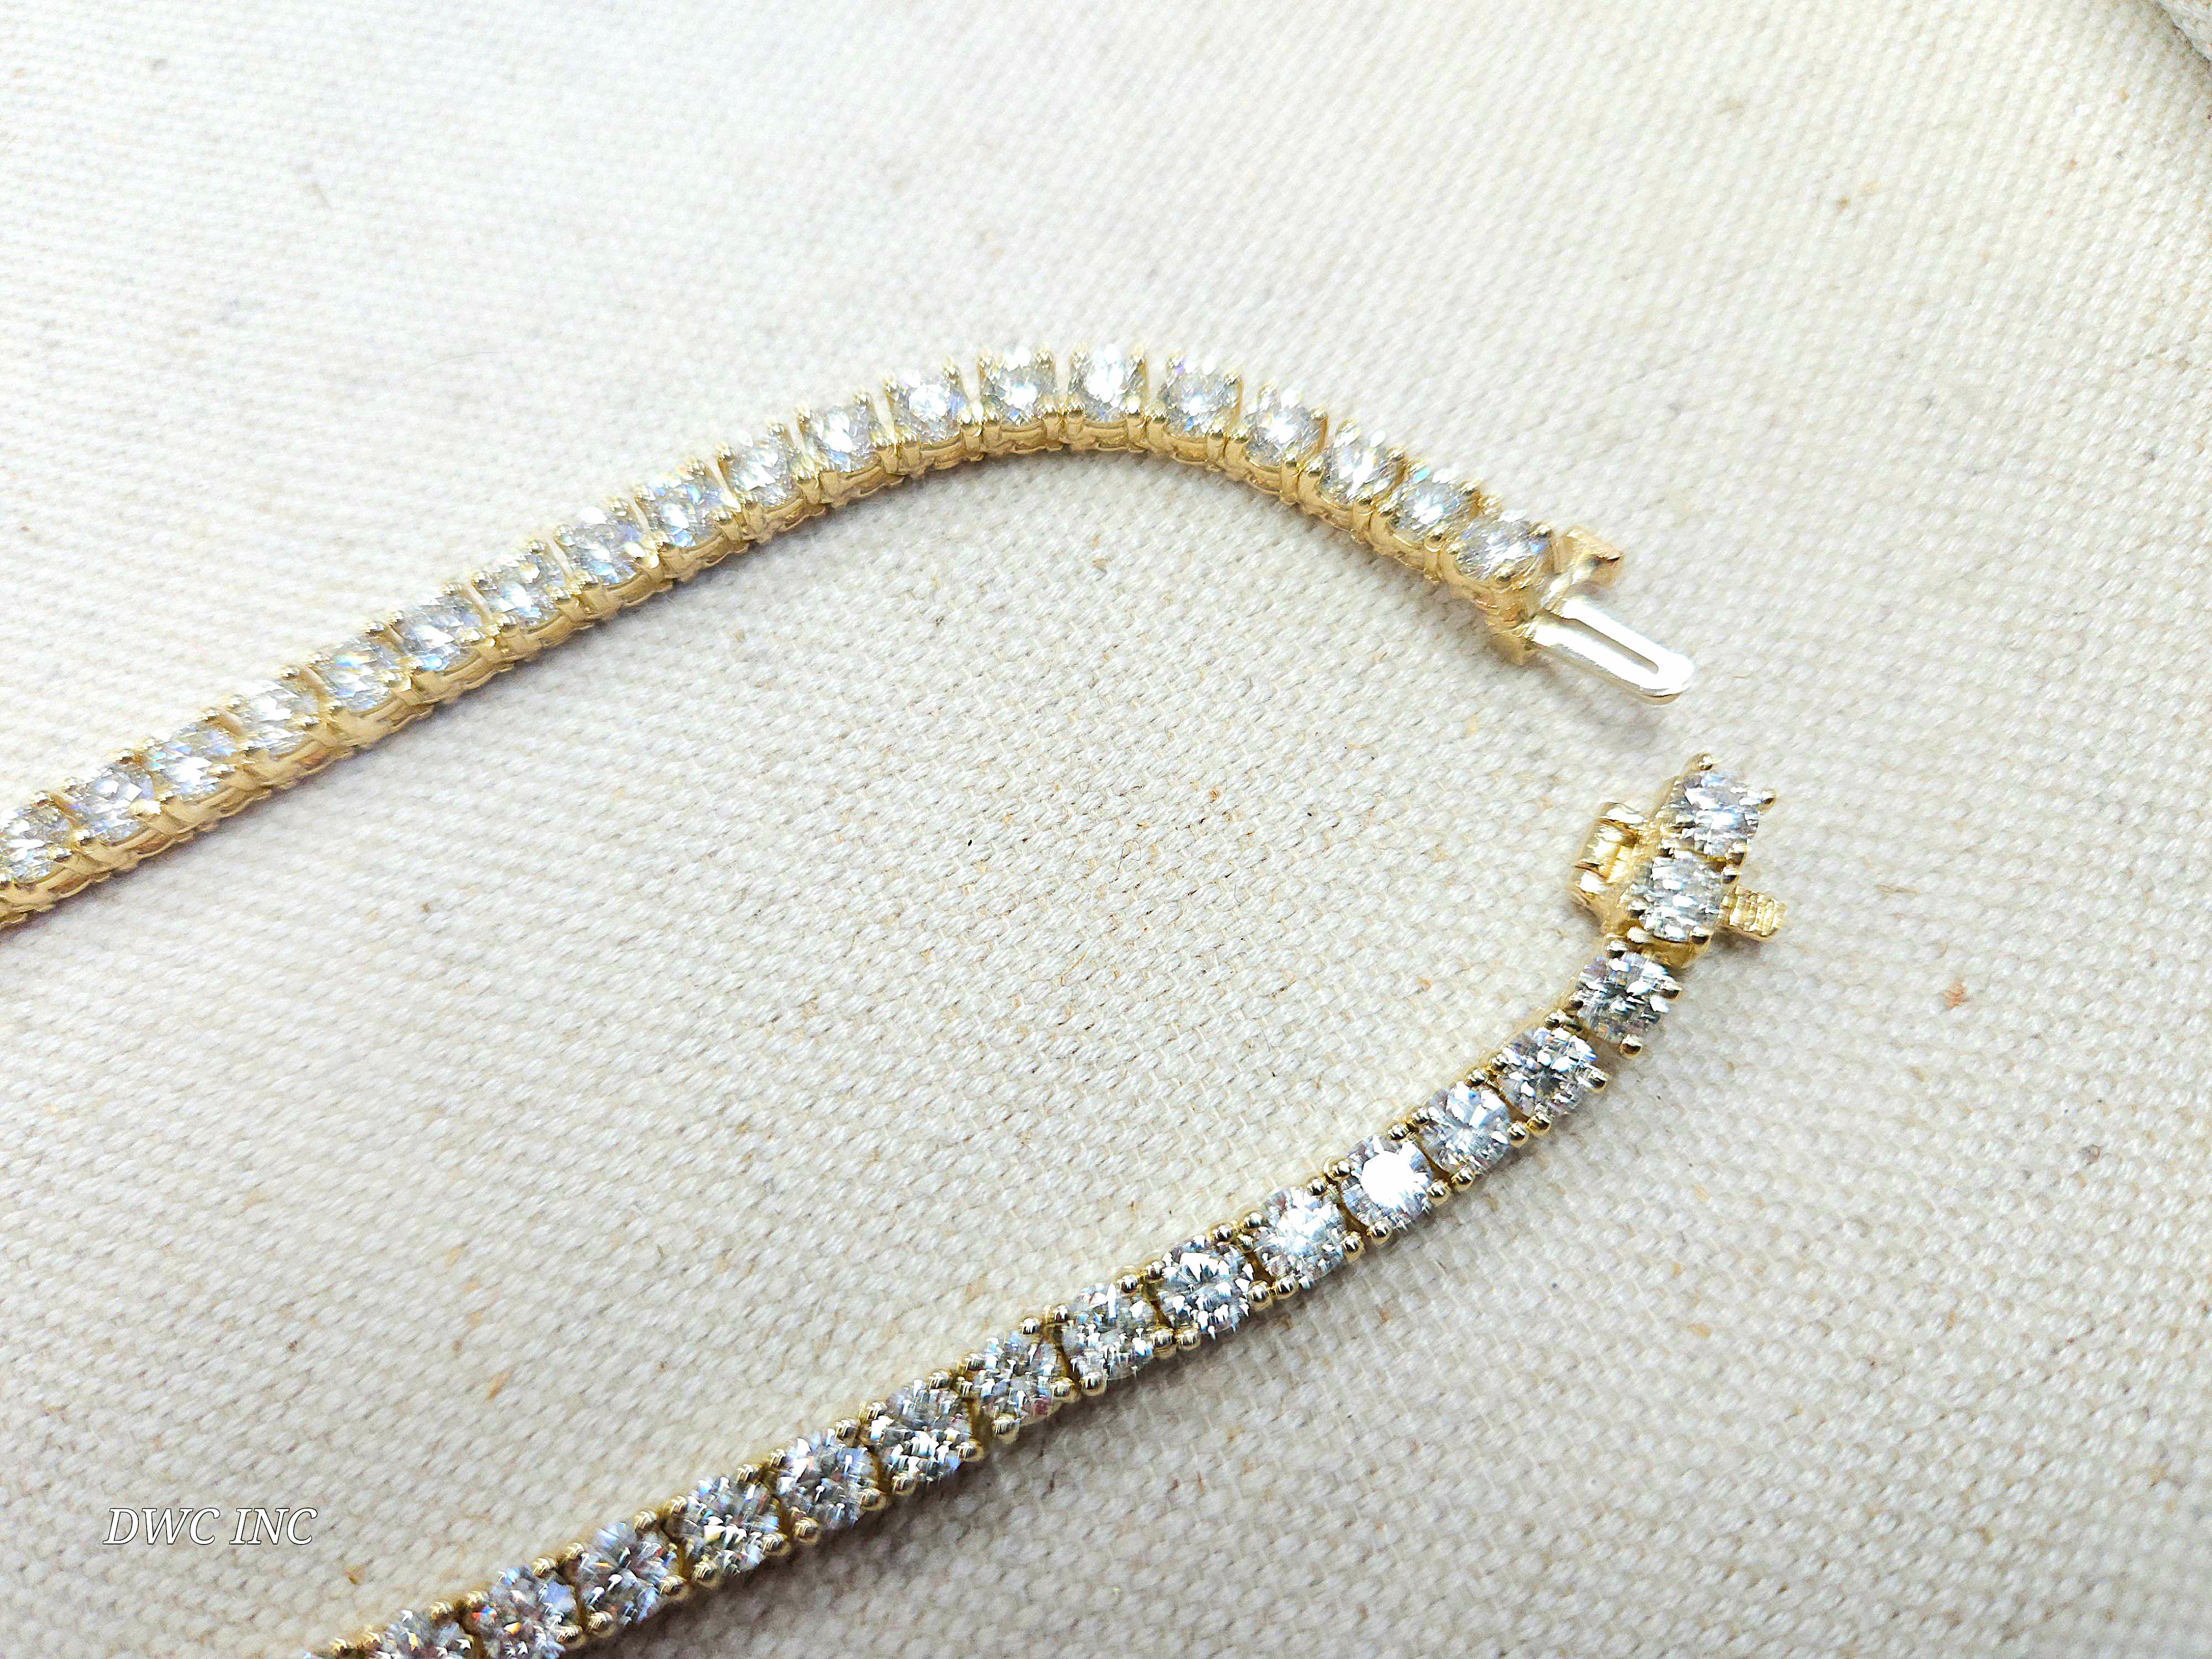 High beautiful quality tennis necklace, round-brilliant cut white diamonds clean and Excellent shine. 
14k yellow gold classic four-prong style for maximum light brilliance. 
16 inch length. Average Color H, Clarity VVS-VS 27.52 gram

Free shipping